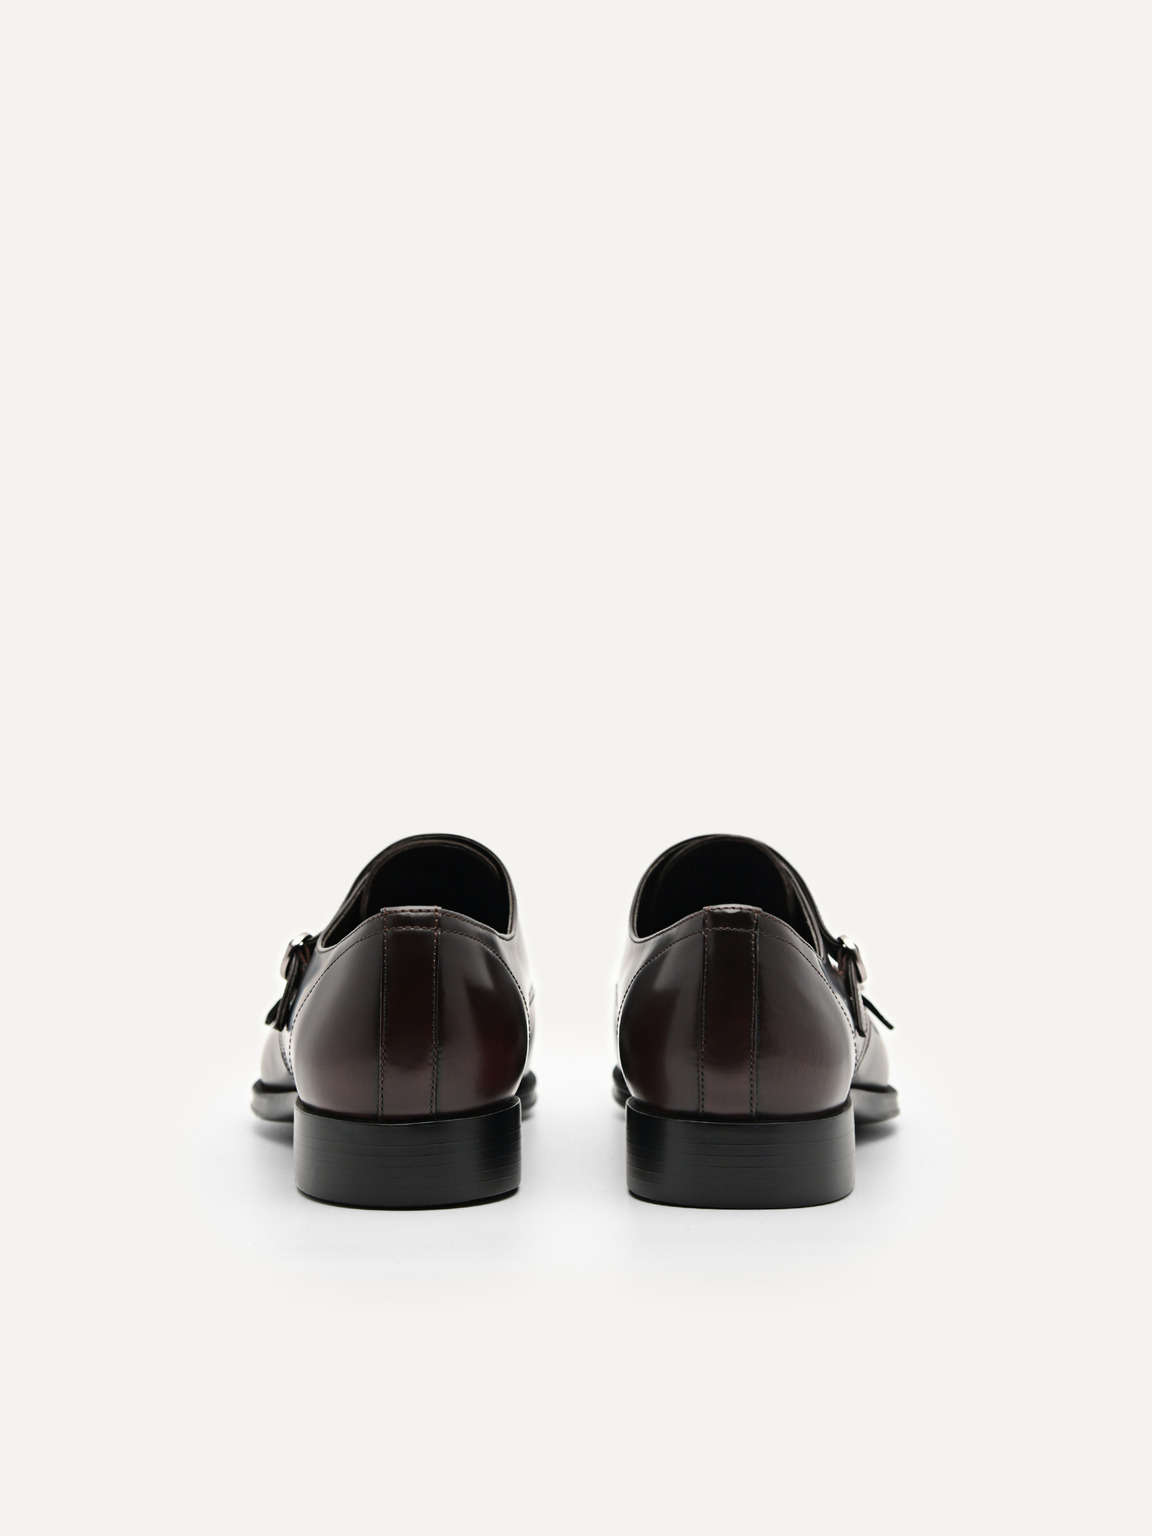 Holly Leather Double Monkstrap Shoes, Maroon